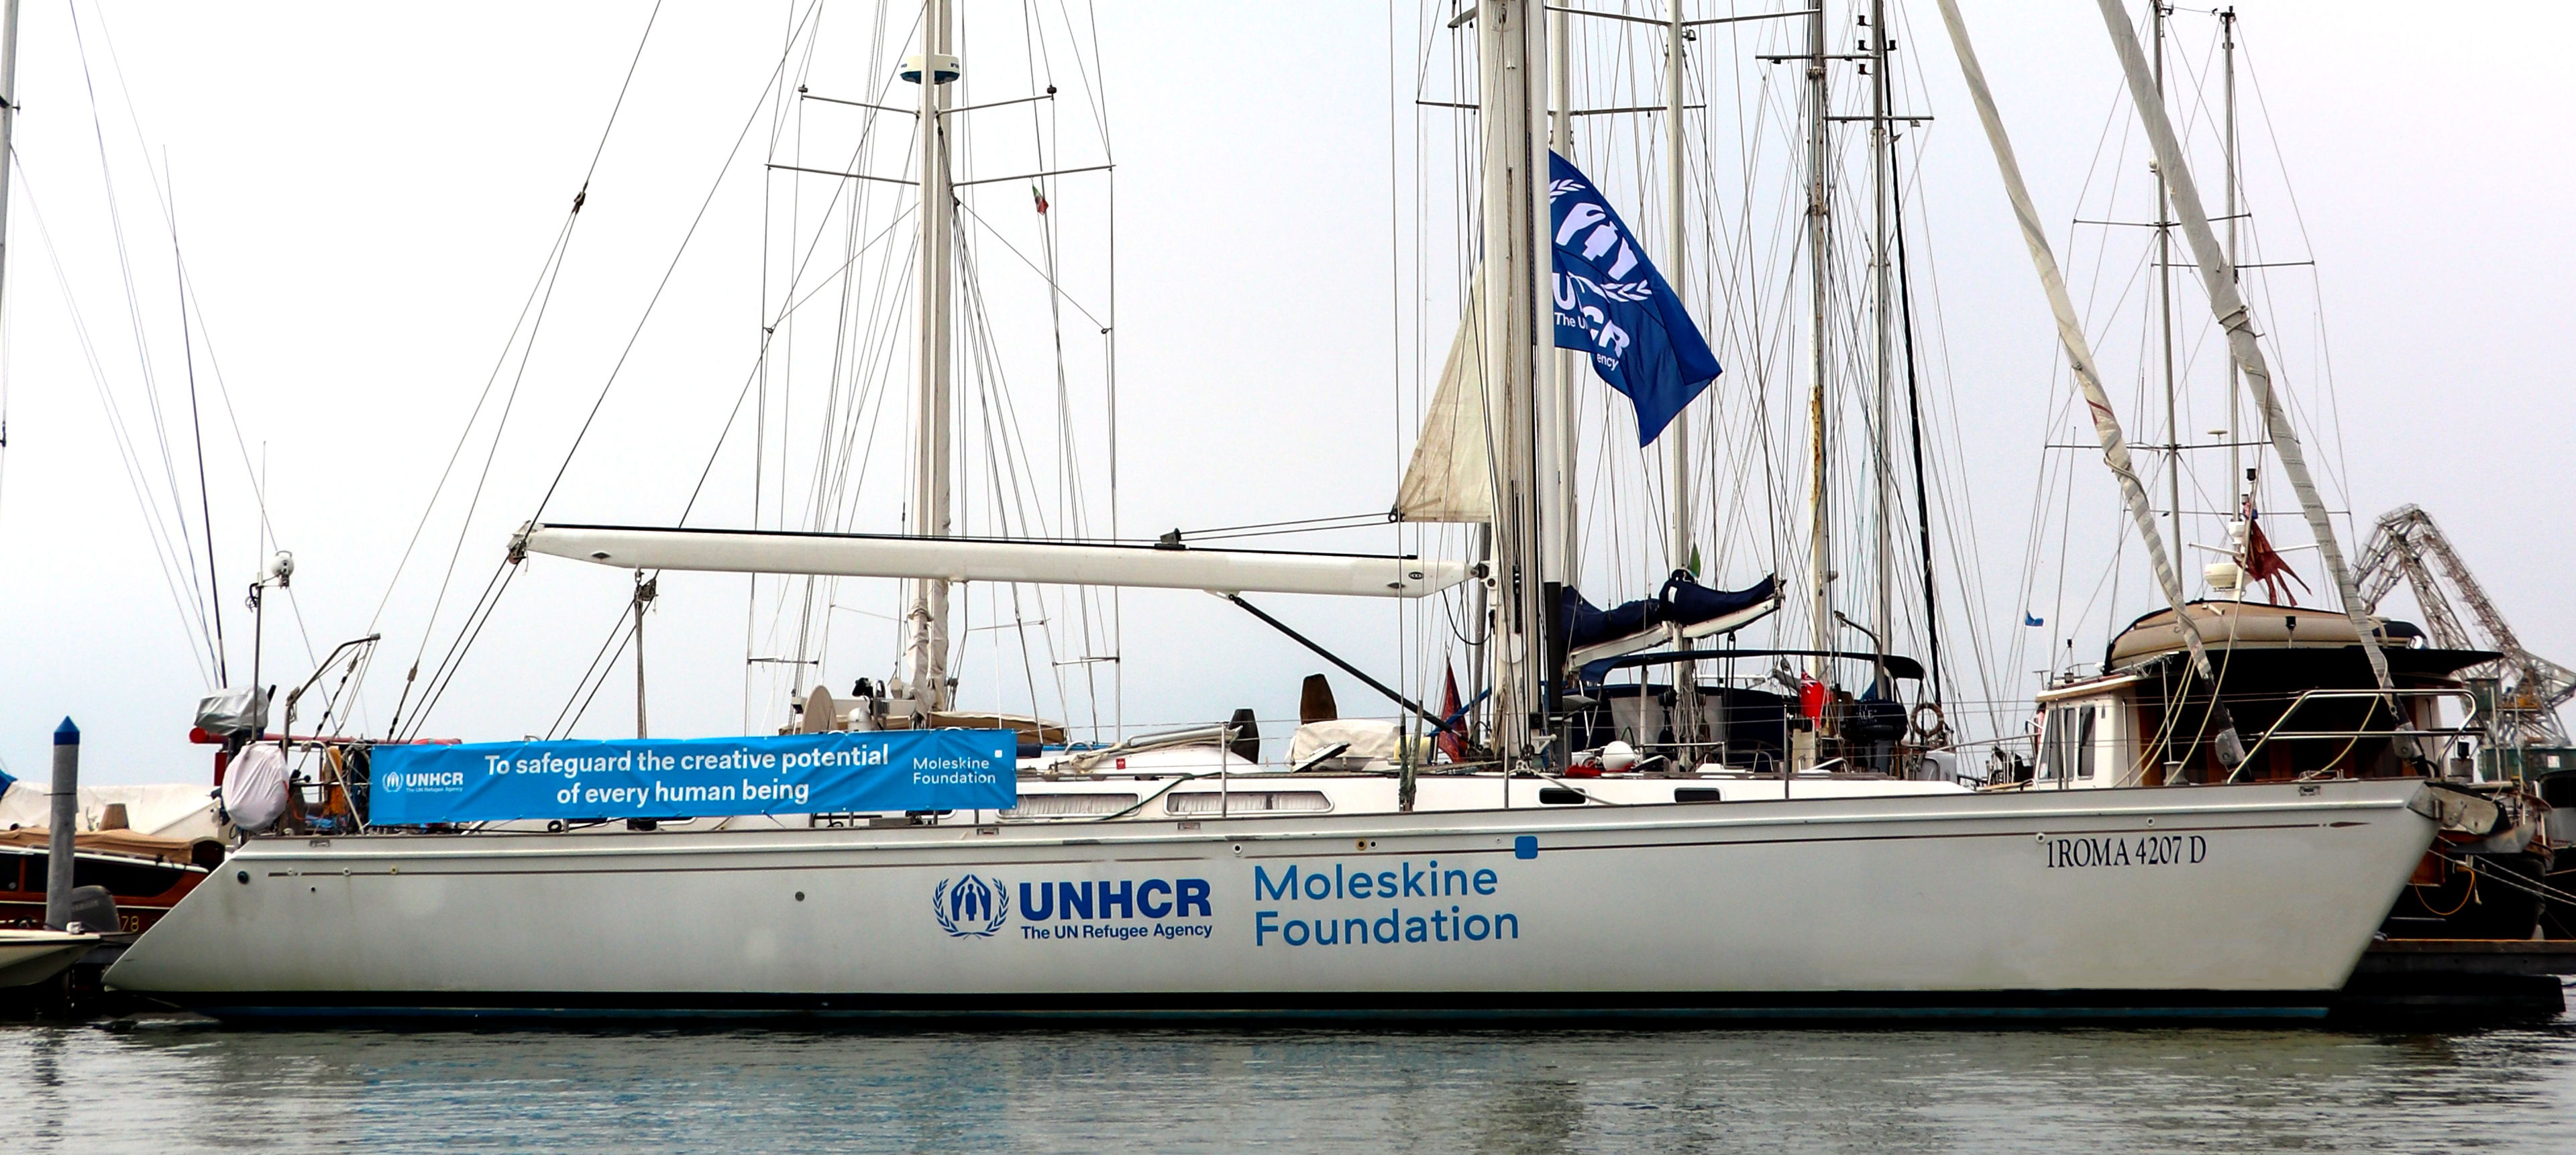 Moleskine Foundation and UNHCR at Barcolana 2019 to support seafaring culture and its binding laws of rescue and welcome